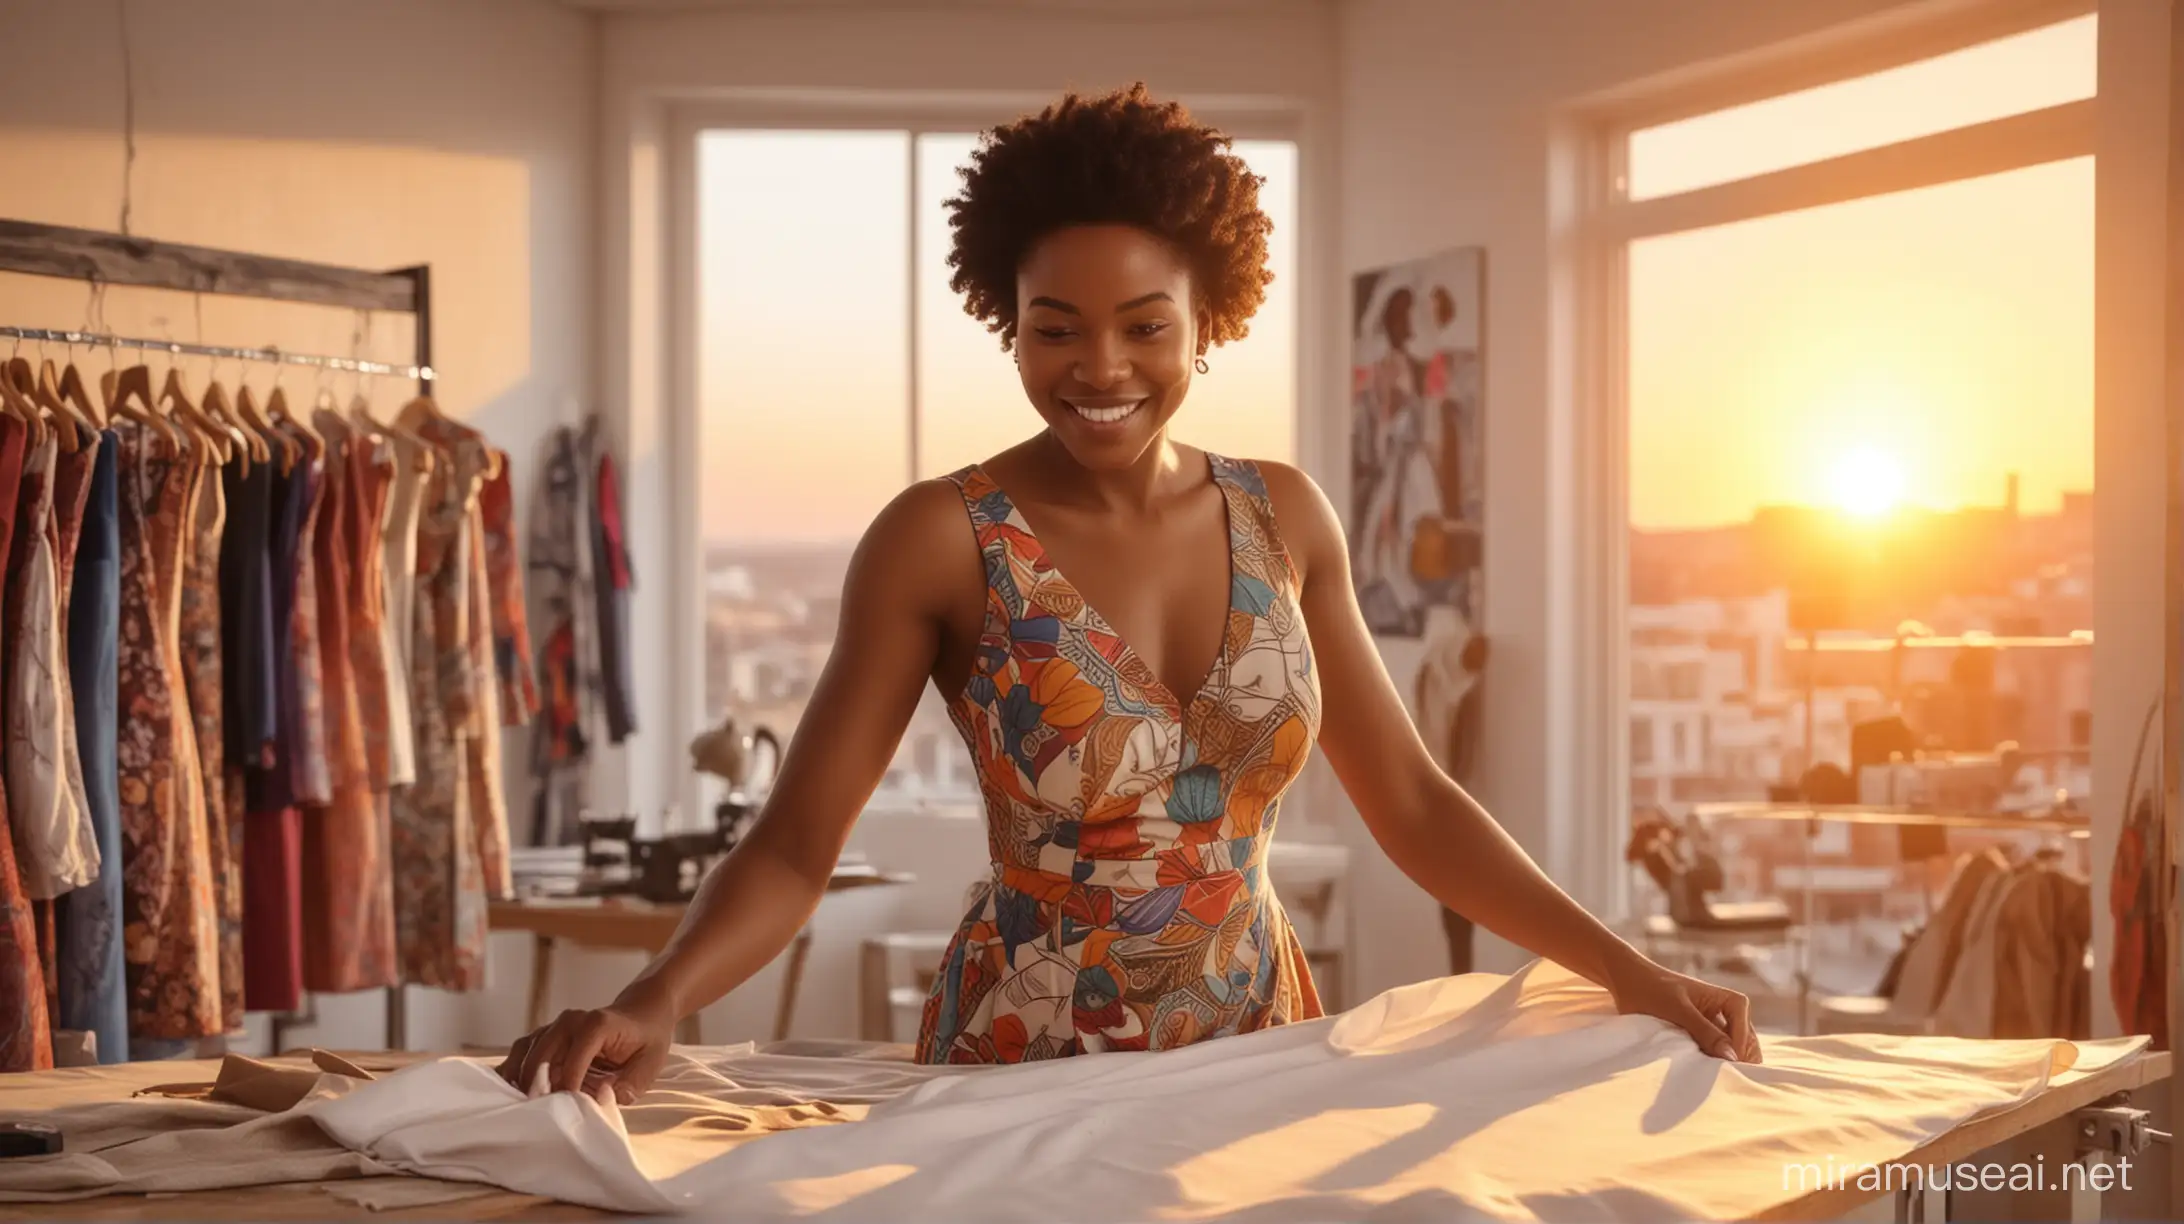 realistic image of a beautiful African American tailor woman making a dress in her shop against the backdrop of a beautiful sunrise with a smile on her face while she works